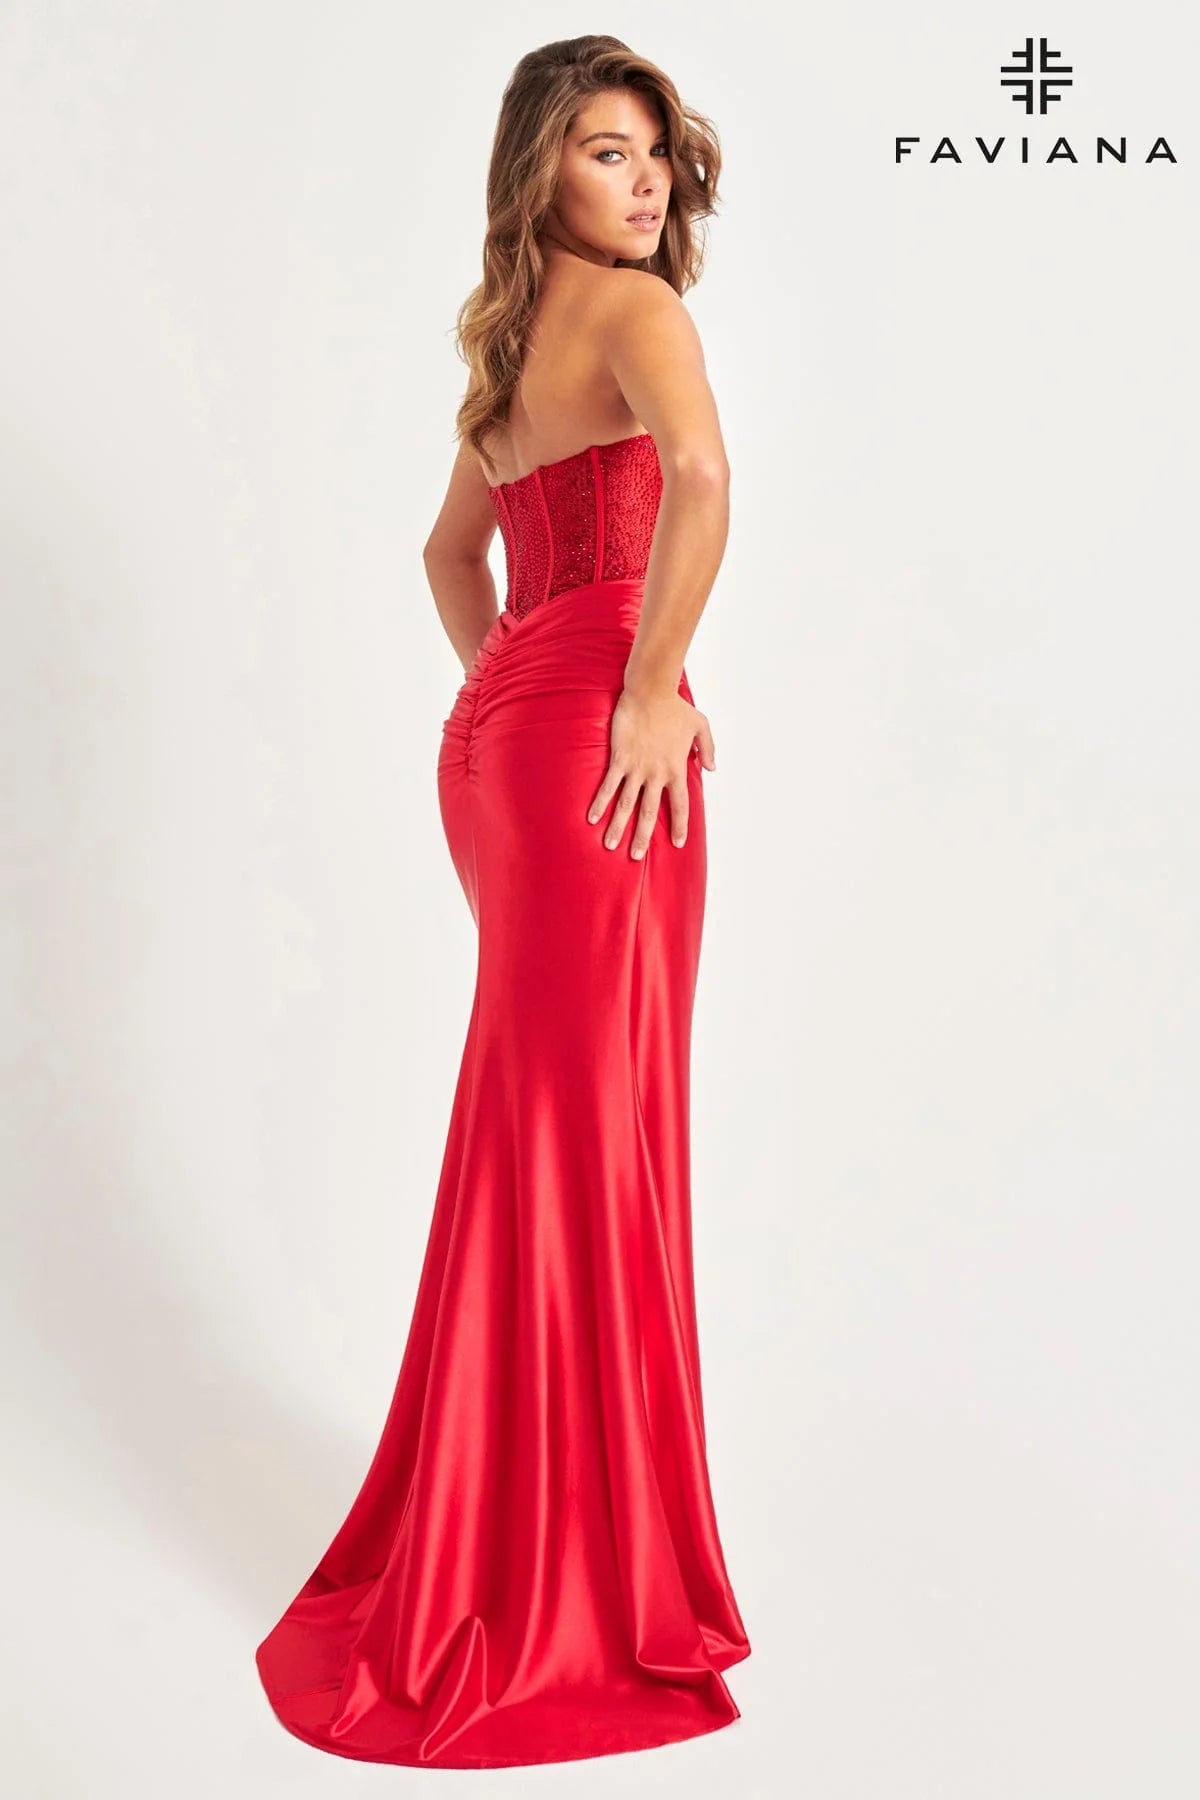 Red Satin Faviana Prom Gown with Sweetheart Neckline and Leg Slit